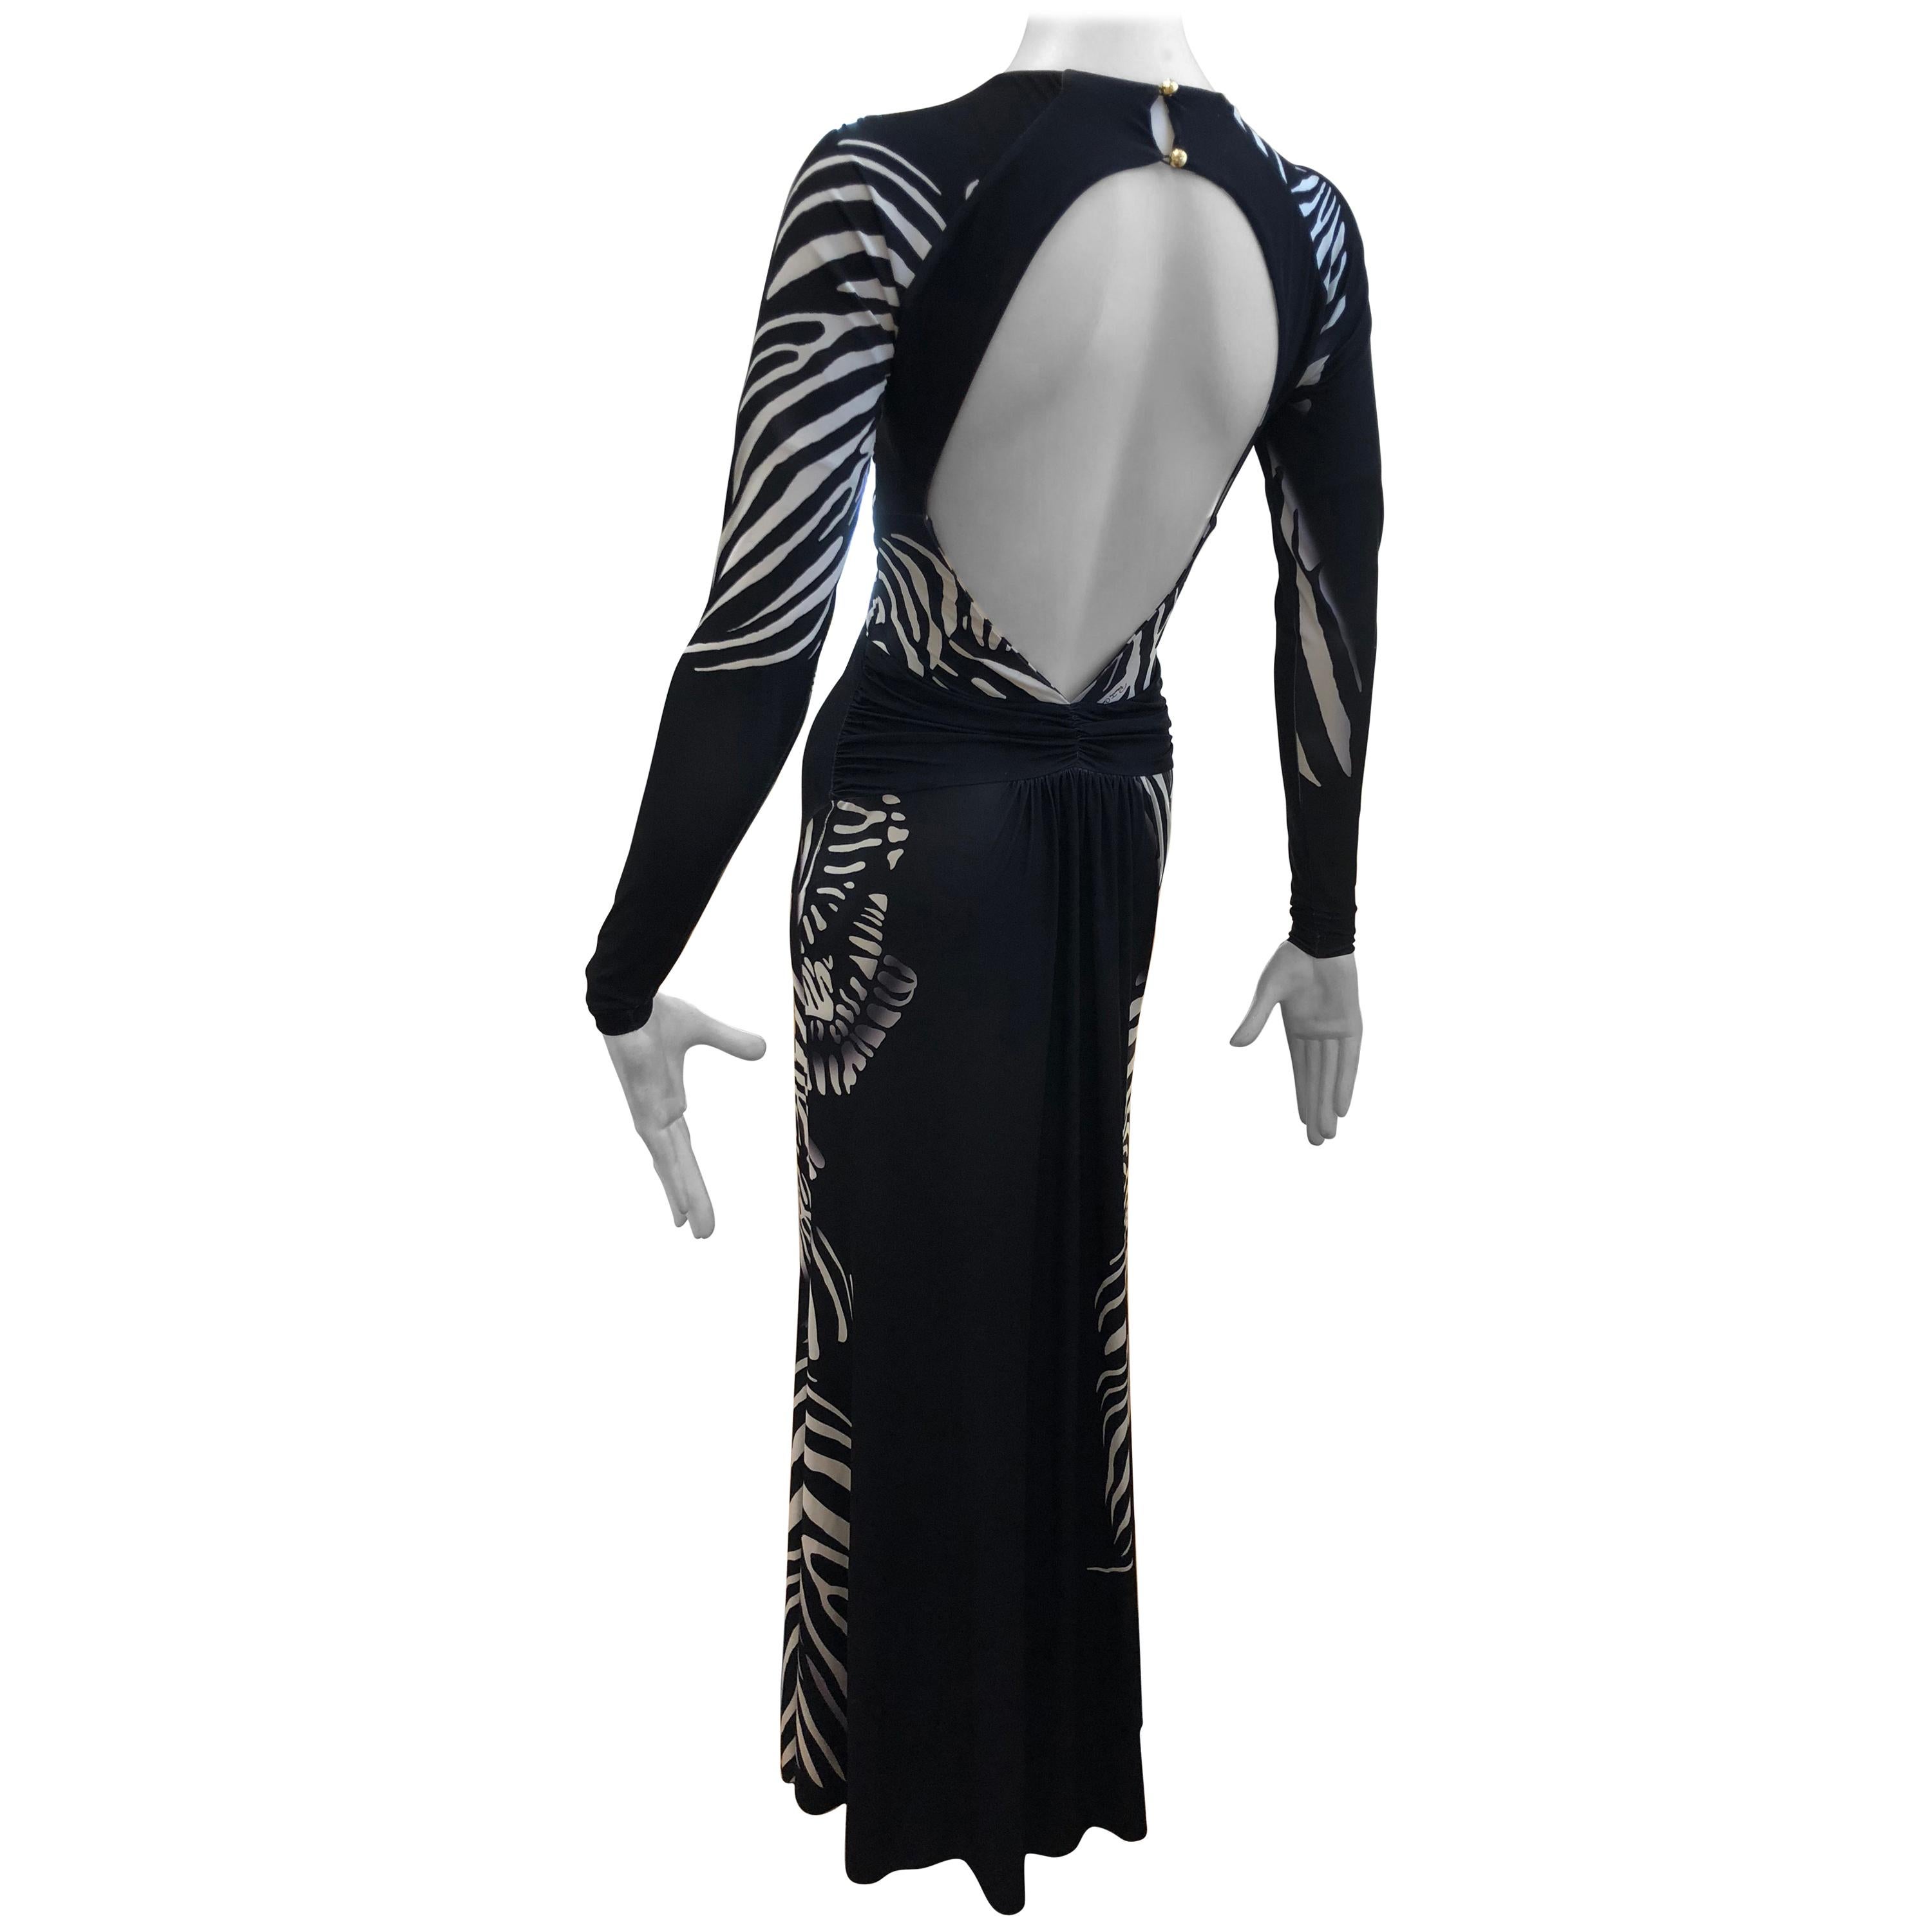 Roberto Cavalli "Zebra" Gown with plunging key hole back 